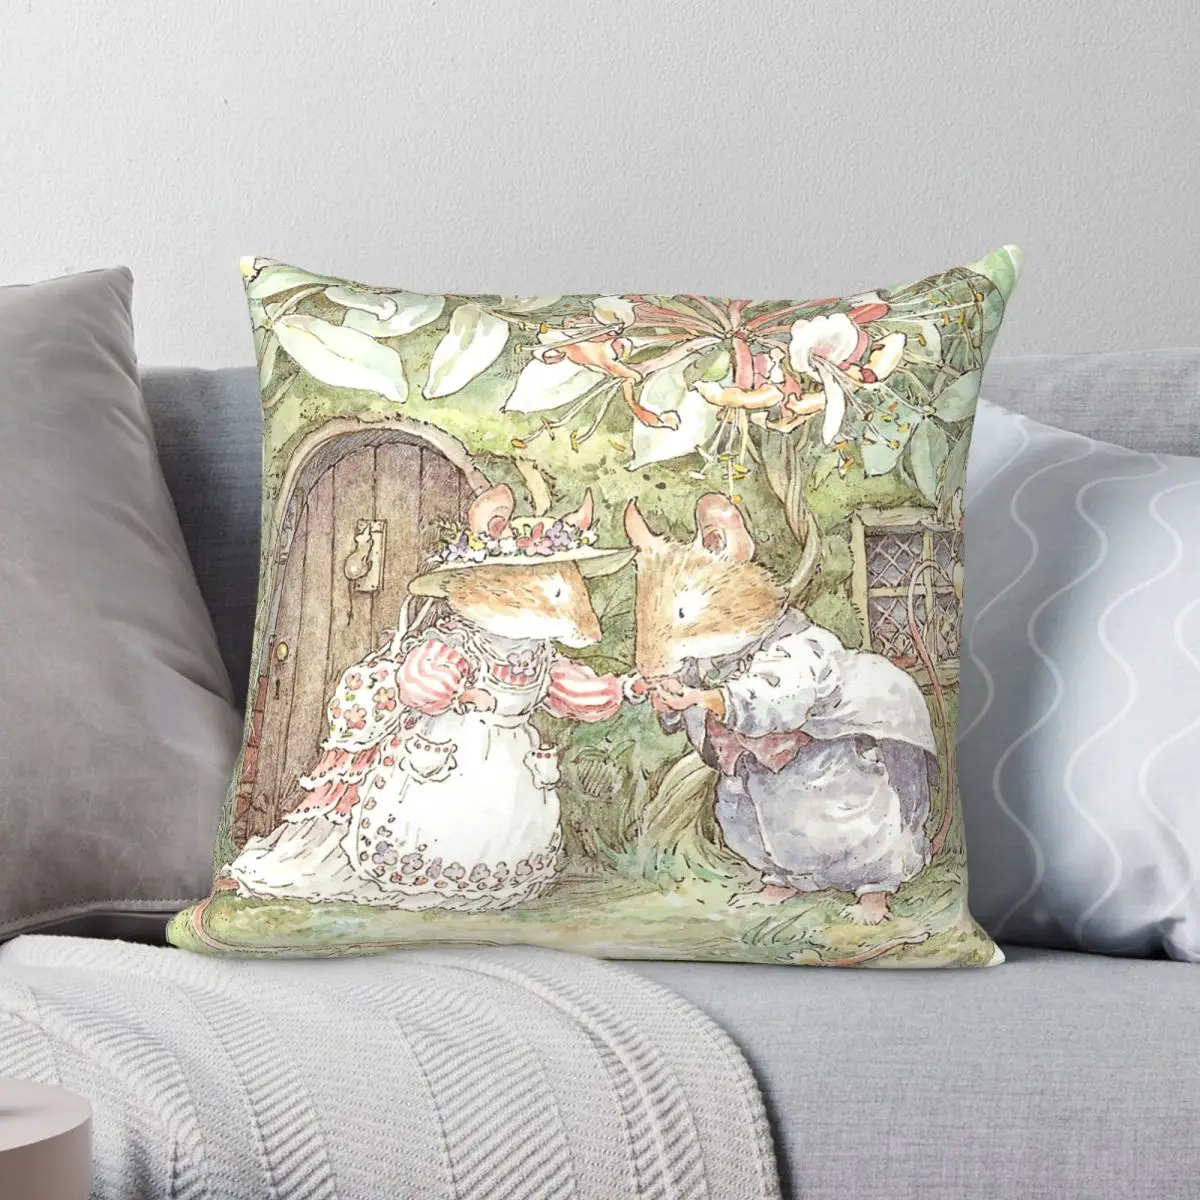 

The Wedding Day Dawned At Last Square Pillowcase Polyester Linen Velvet Printed Zip Decor Home Cushion Cover Wholesale 18"